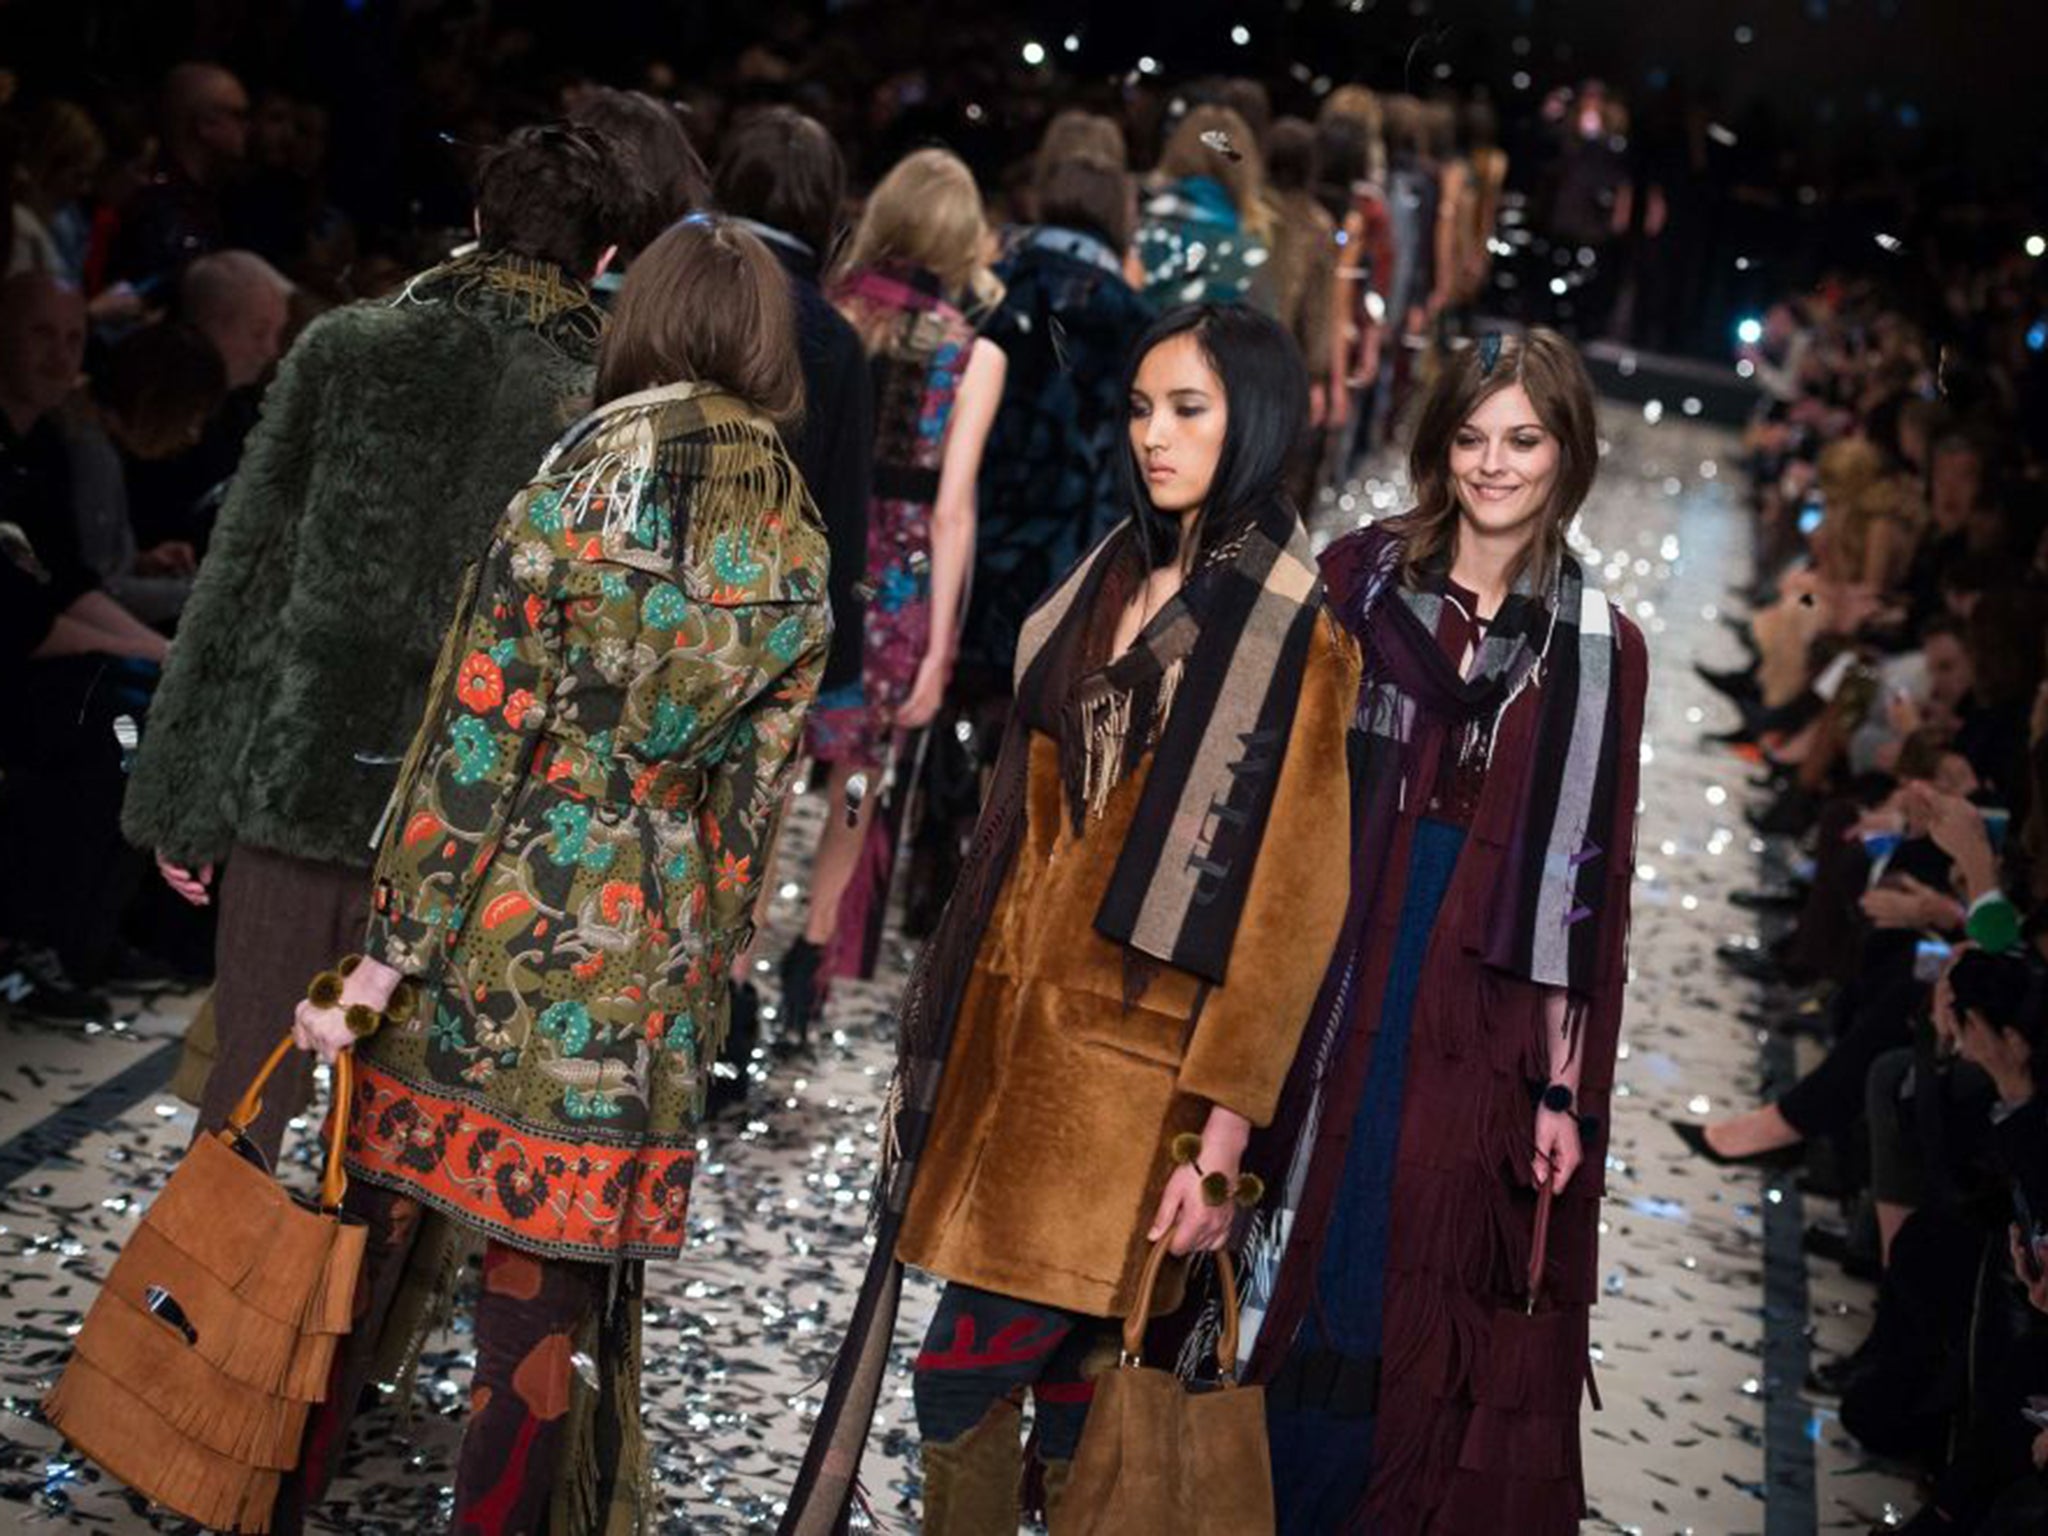 Models wearing clothes from the Burberry Prorsum collection during the company’s 2015 autumn/winter London Fashion Week show